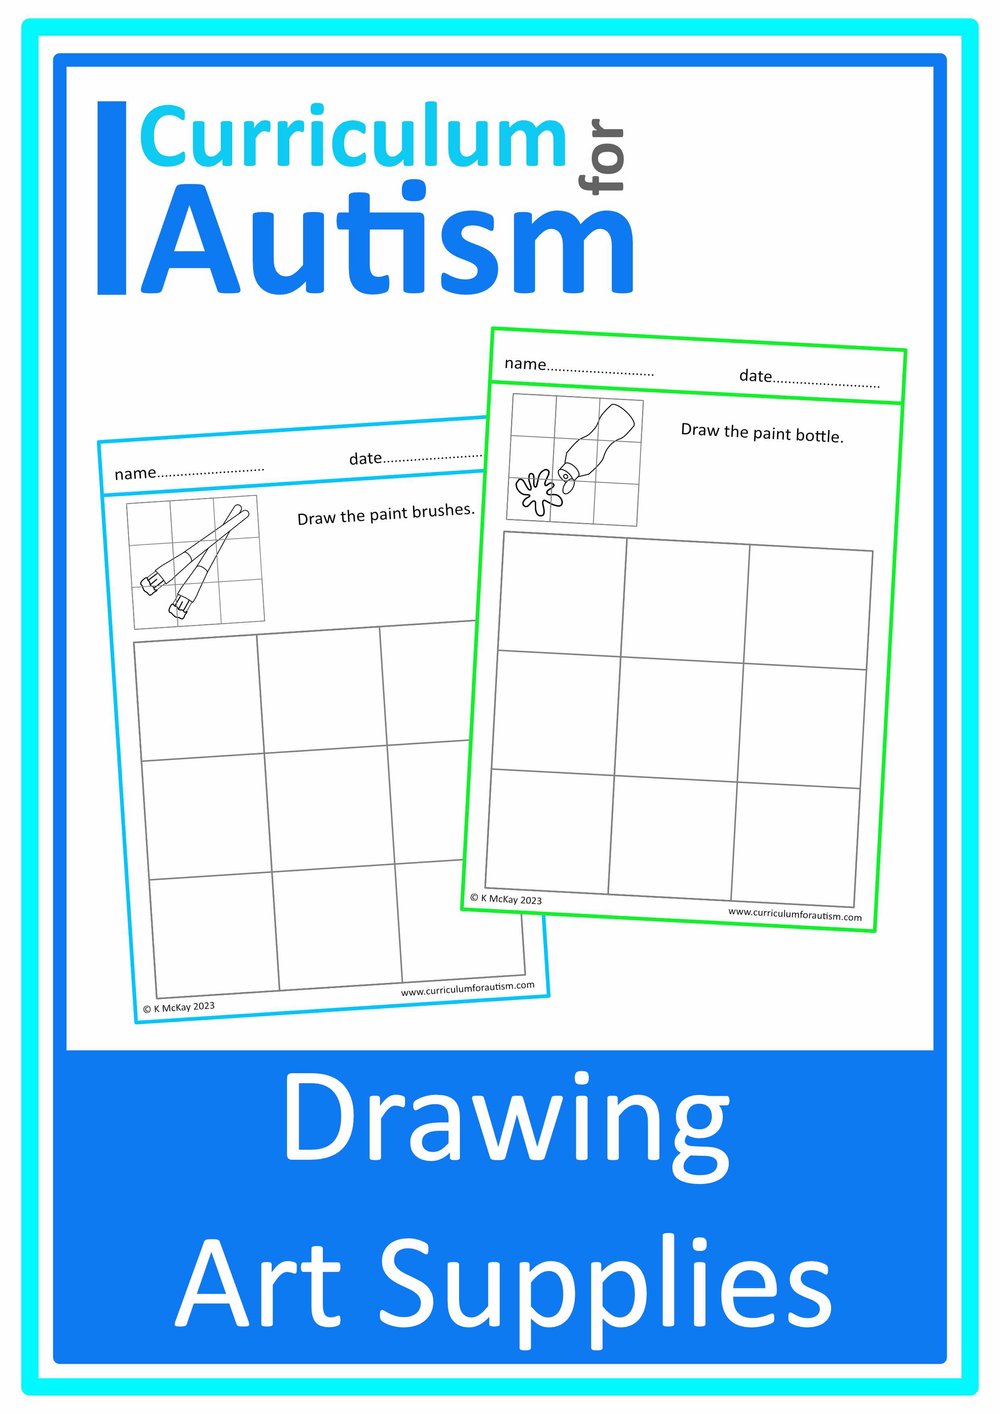 Grid Method Drawing Art Supplies Autism Special Education Inclusion Class  OT Homeschool Lessons — Curriculum For Autism